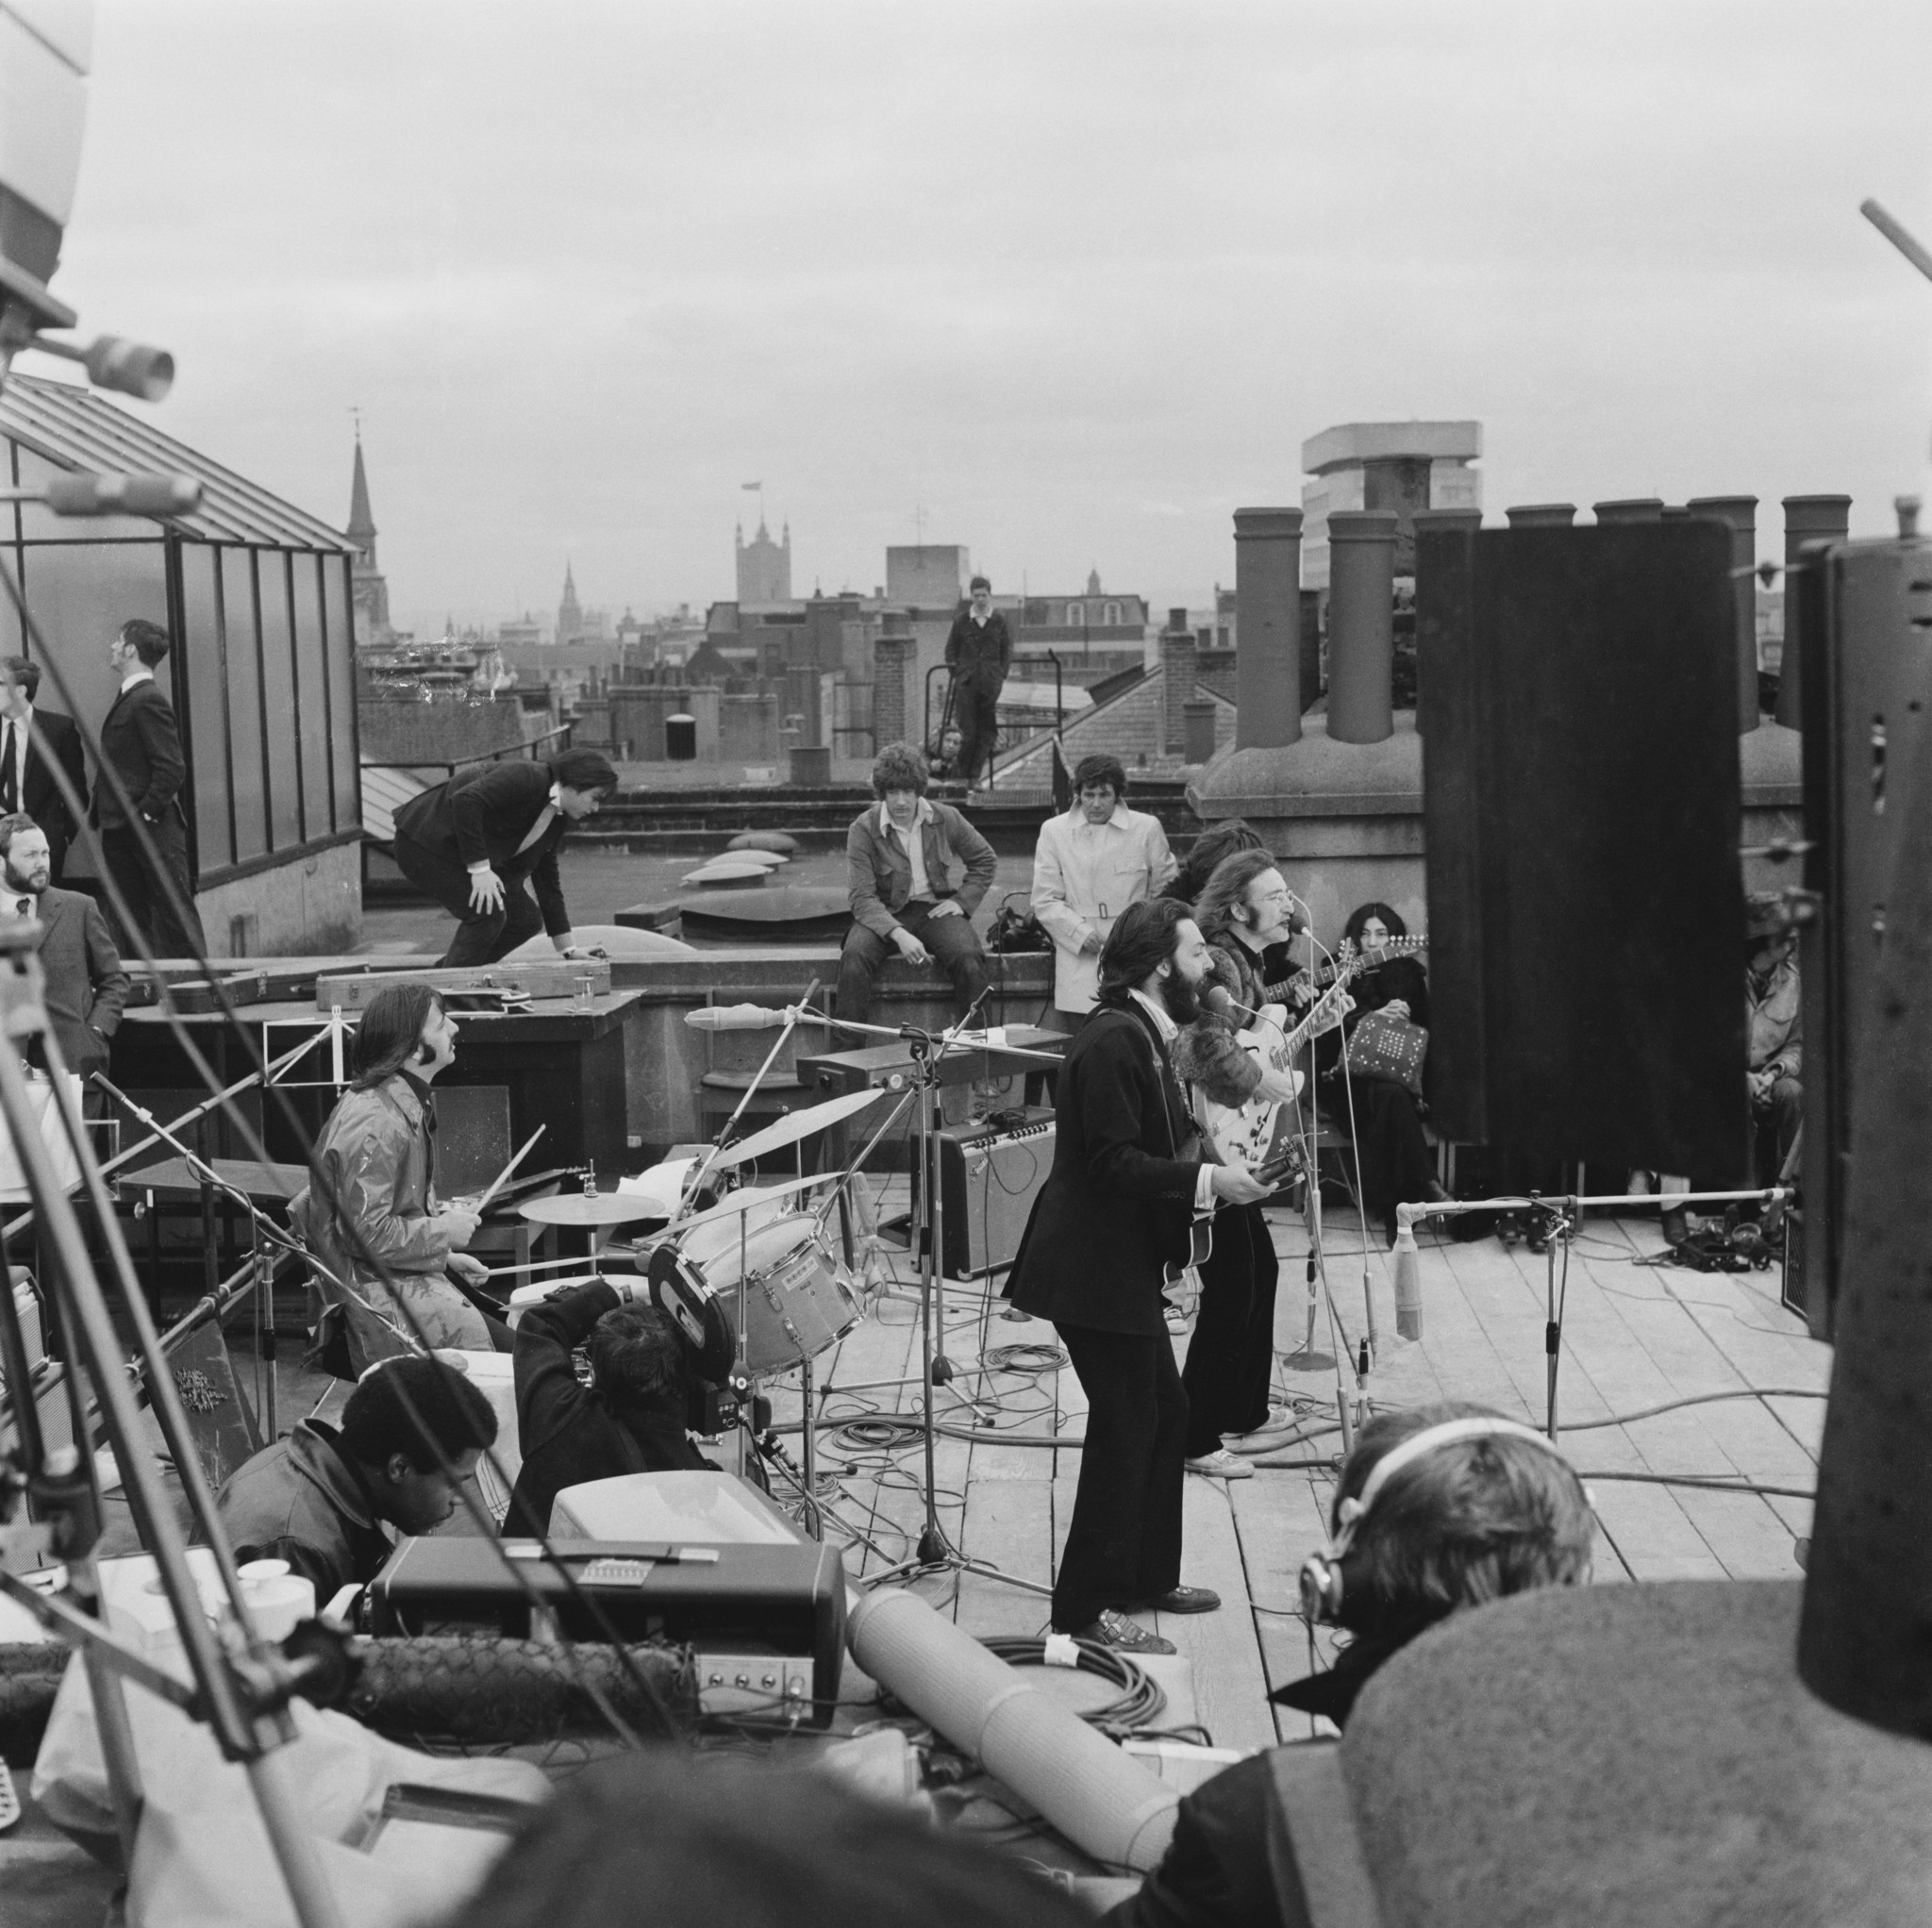 The Beatles perform their last live public concert on the rooftop of the Apple Organization building for director Michael Lindsey-Hogg's film documentary 